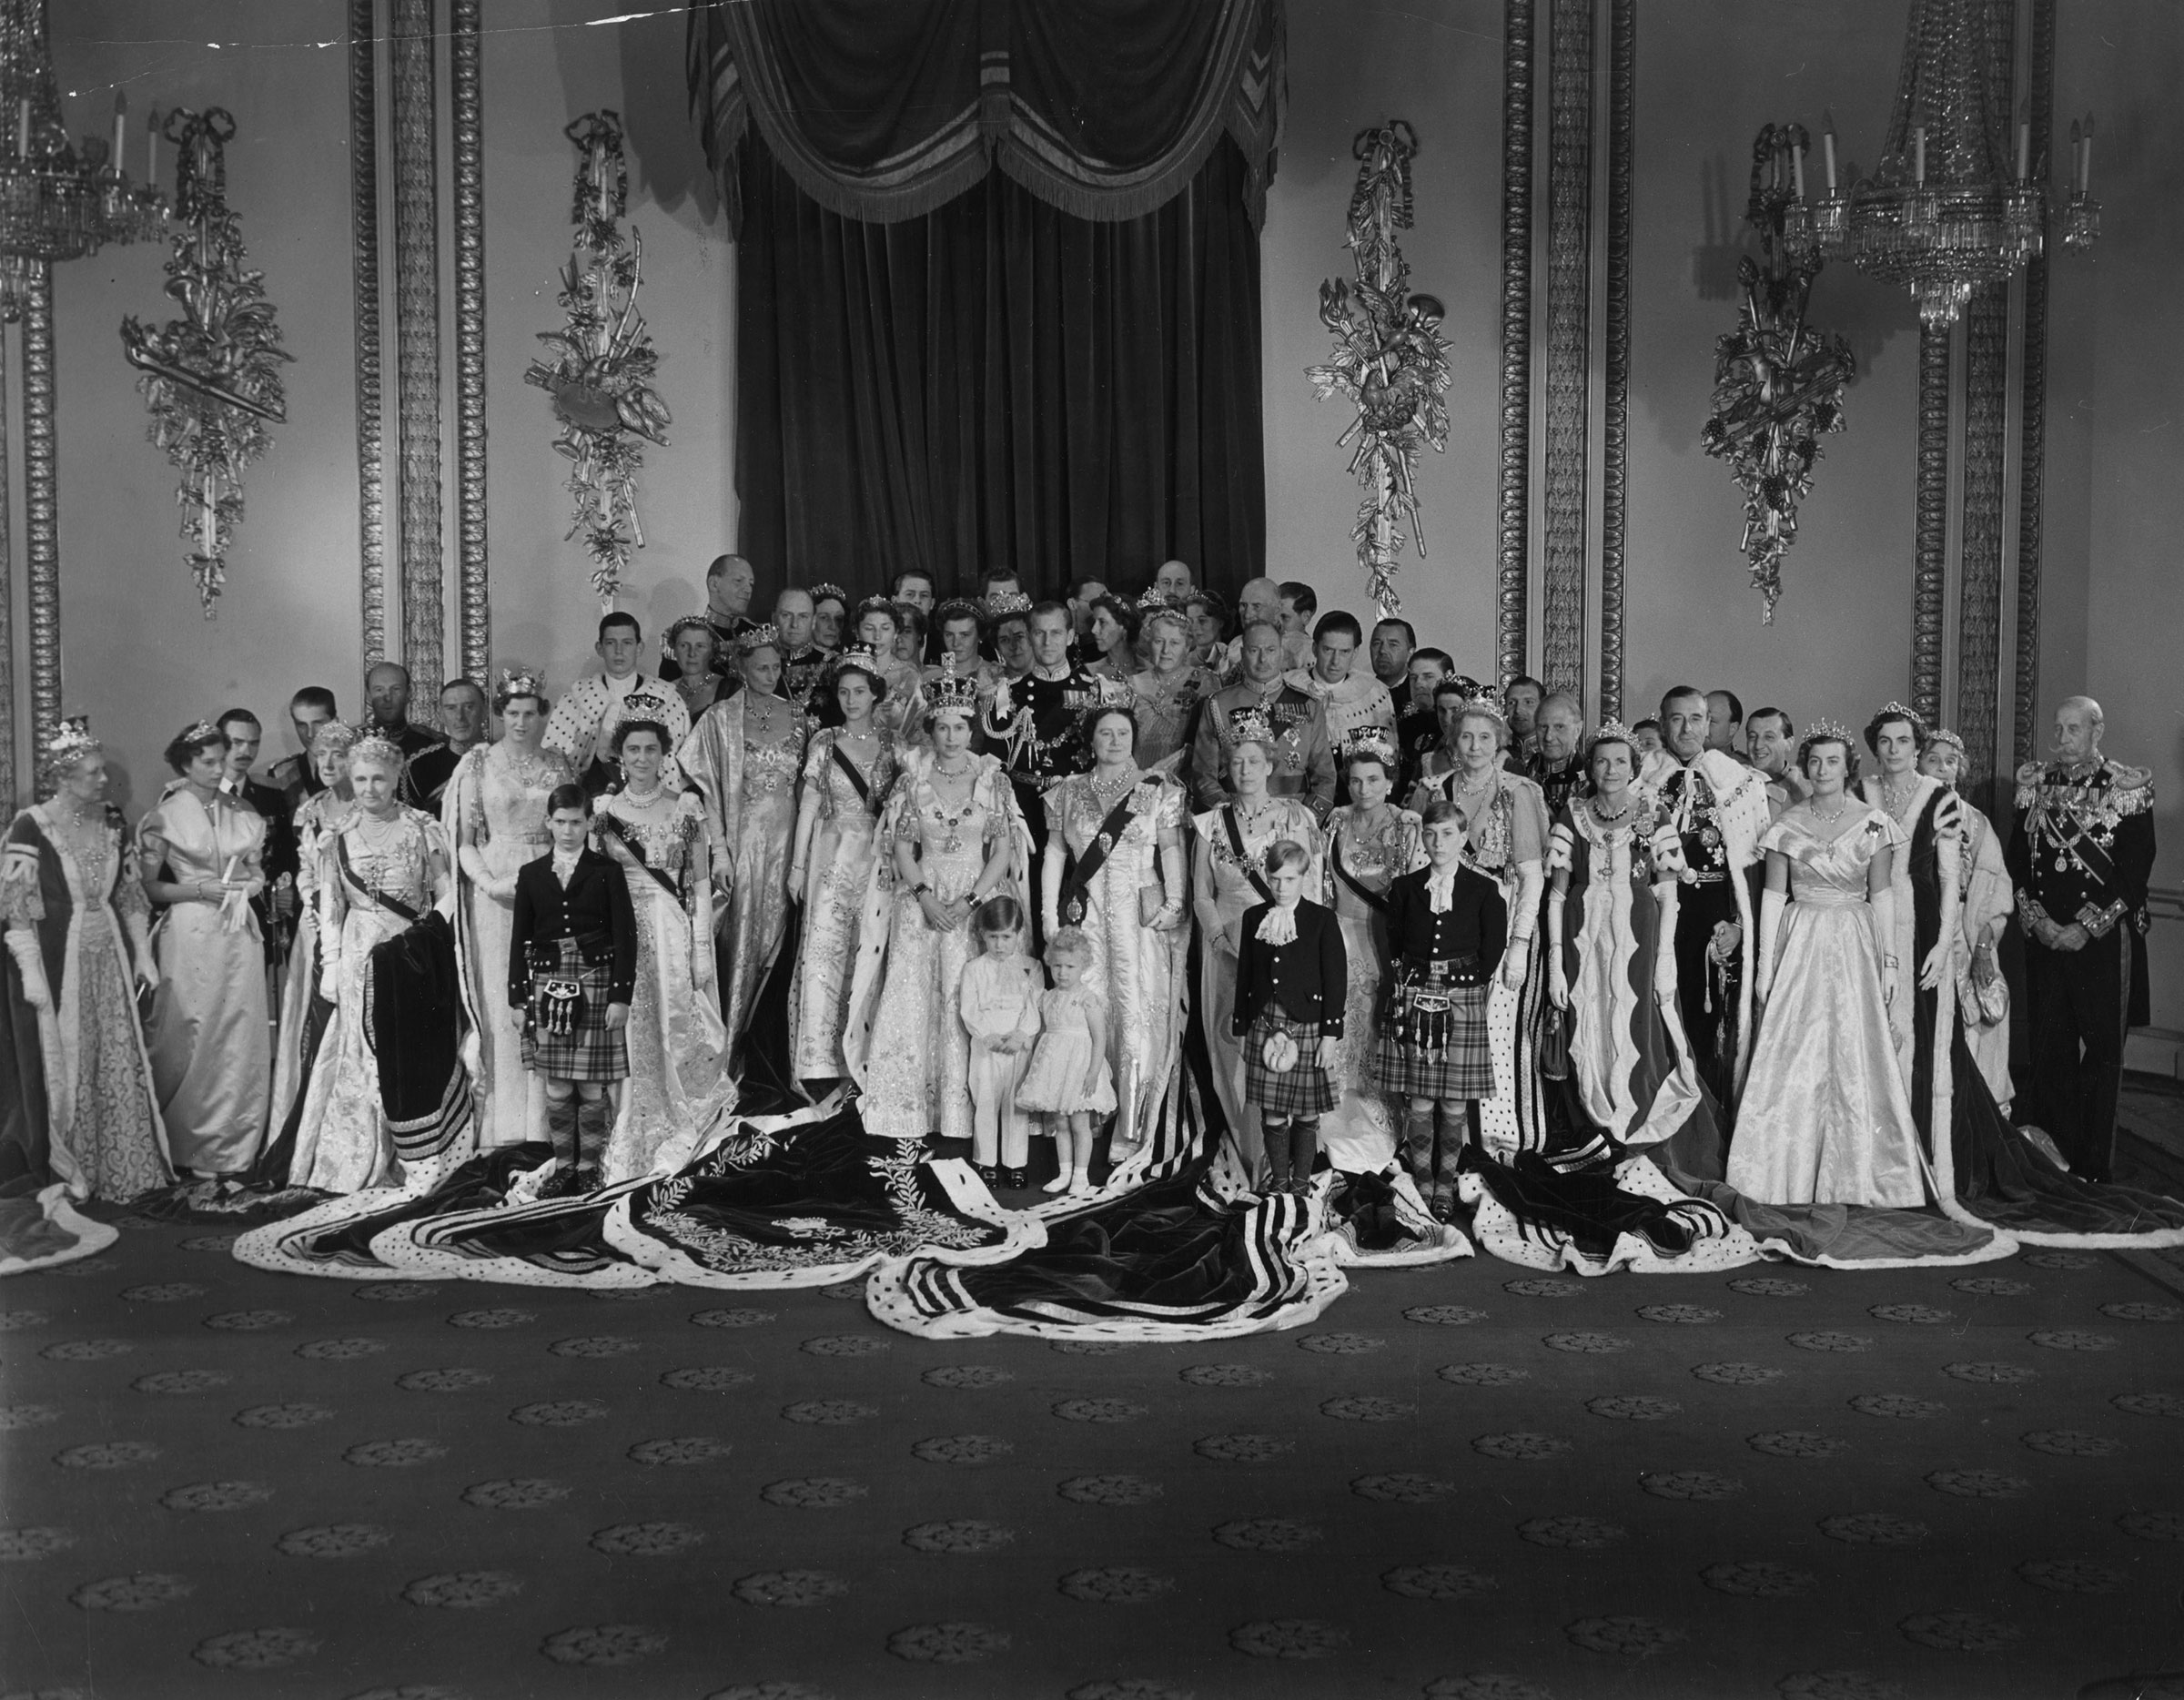 Queen Elizabeth II with Prince Philip, Duke of Edinburgh, Queen Elizabeth The Queen Mother, Princess Margaret Rose and members of the immediate and extended Royal Family, as well as foreign dignitaries, after her Coronation ceremony. (Central Press/Getty Images)